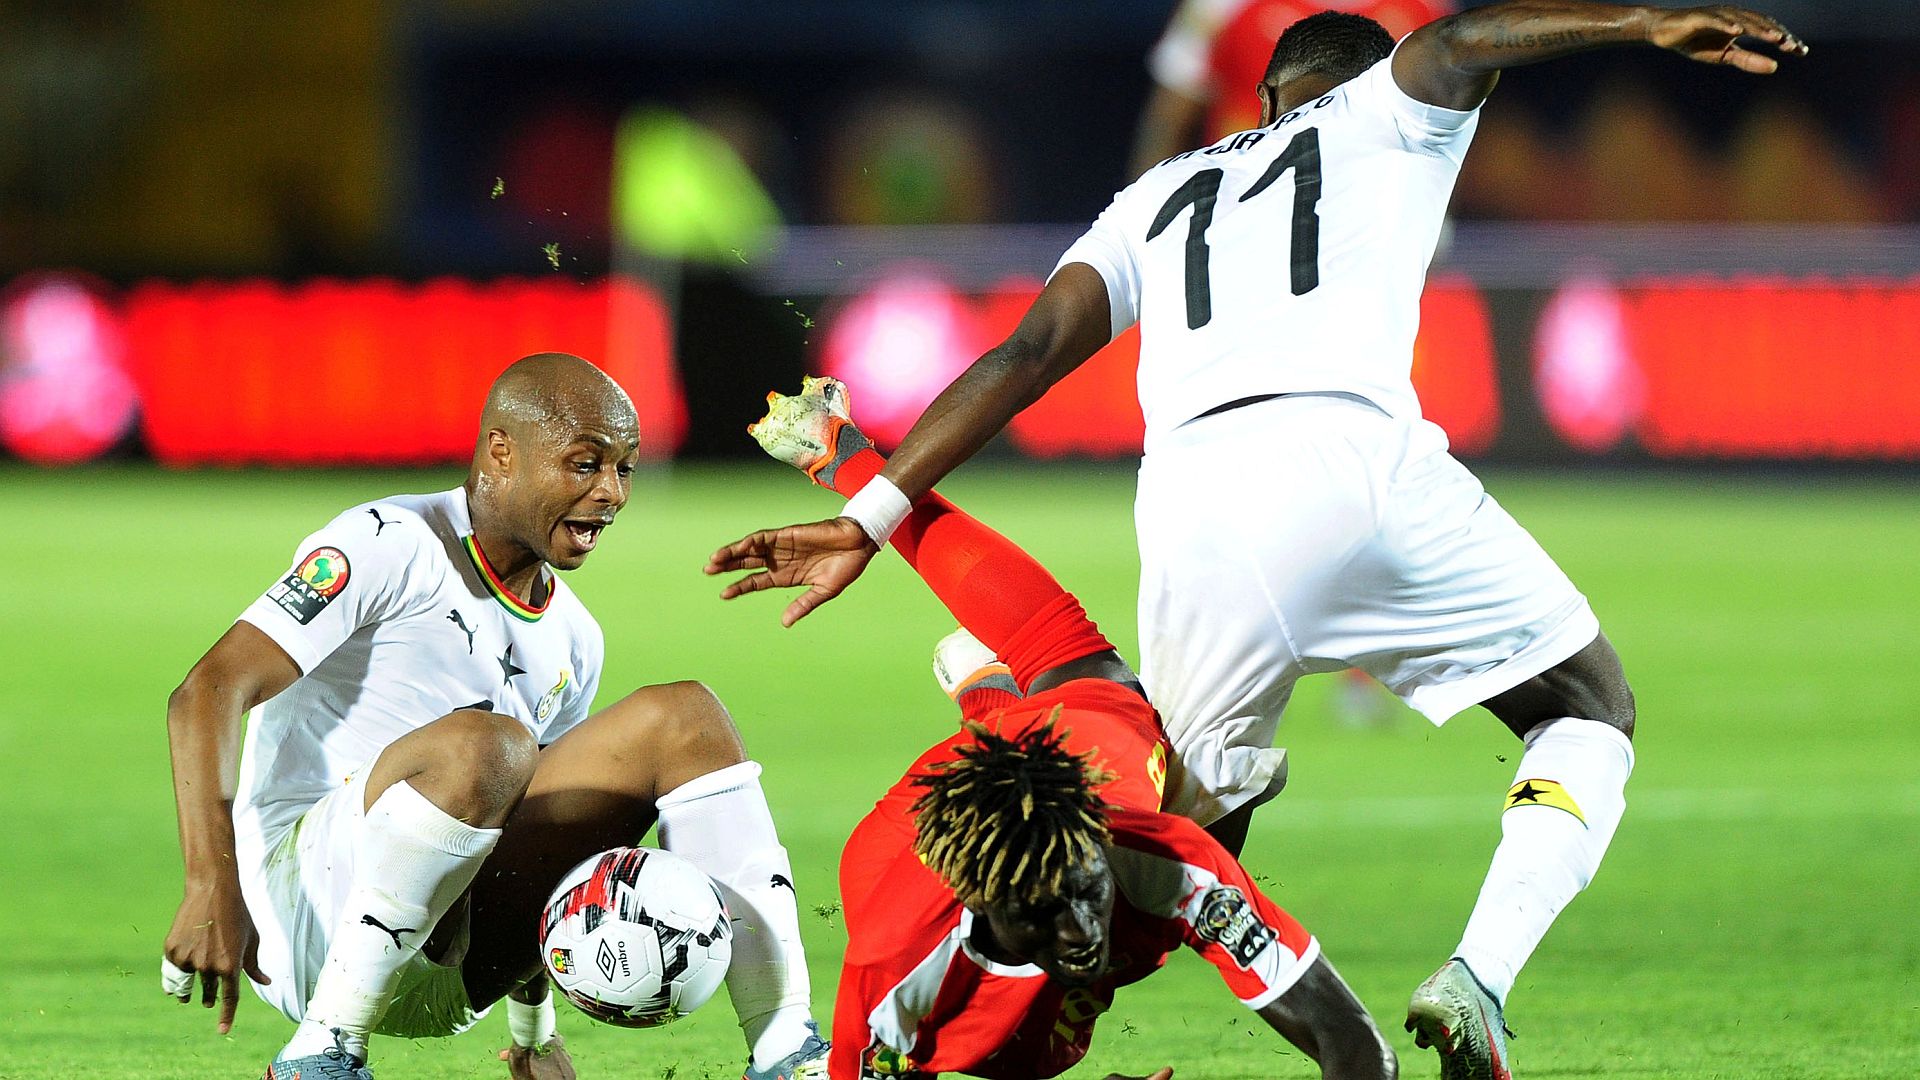 Ghana 0-0 Cote d’Ivoire: Black Stars and Elephants draw in Cape Coast thumbnail